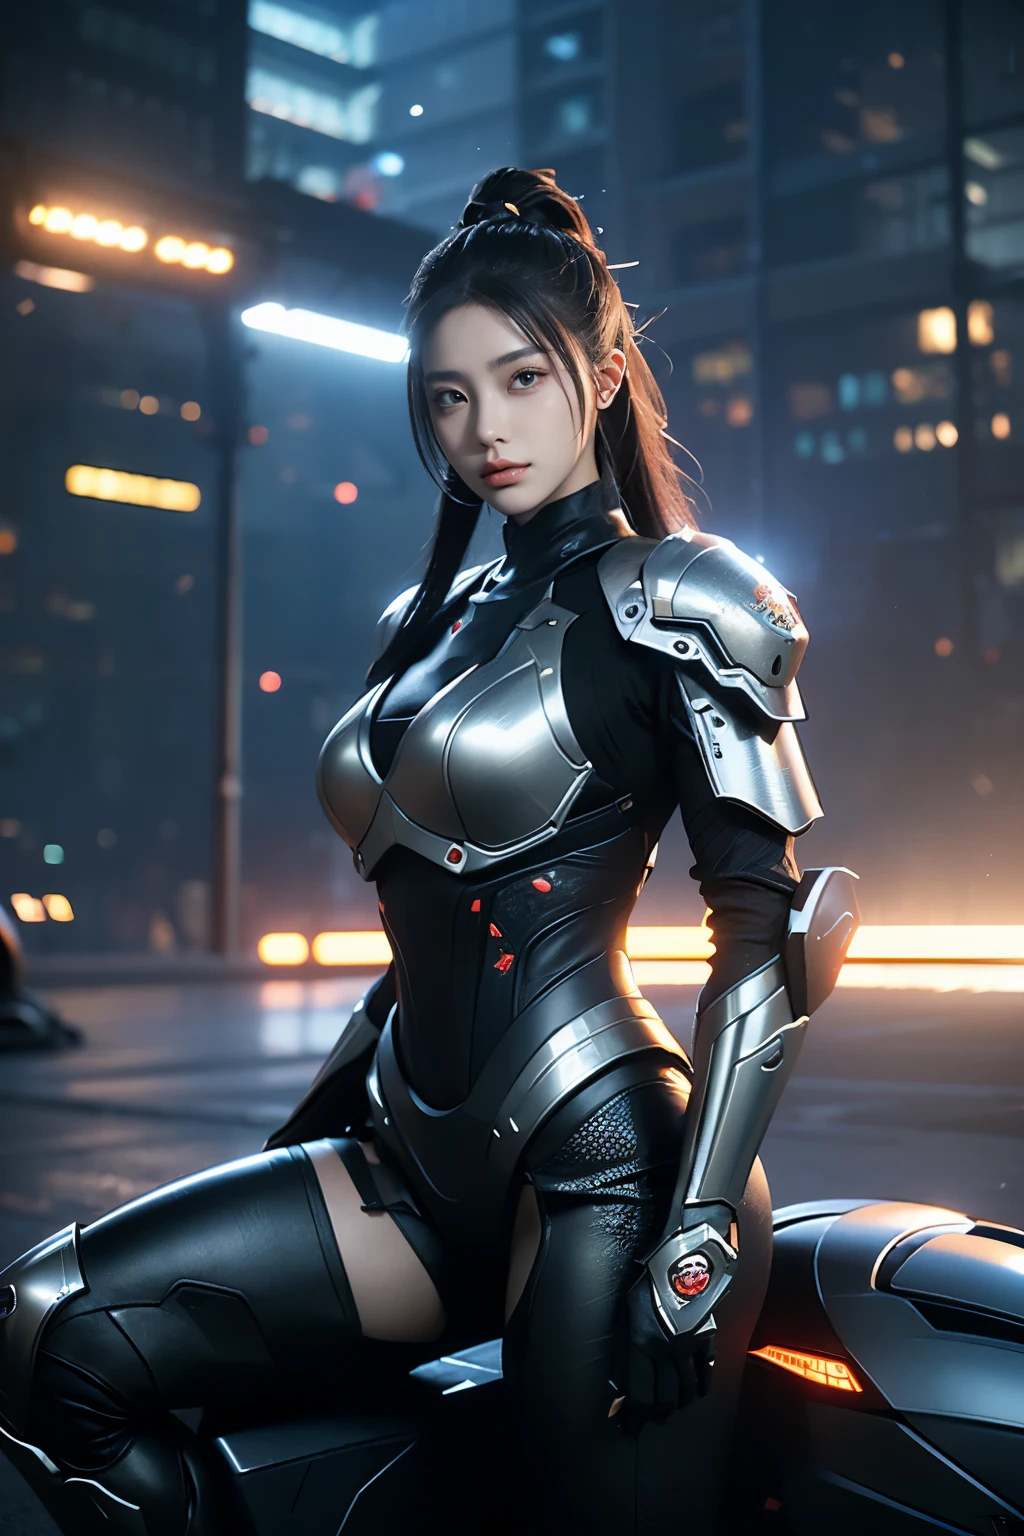 Game Art，Best image quality，Maximum resolution，8k，((A half-length photo))，((portrait))，(Rule of Thirds)，Unreal Engine 5 rendering works， (Future girl)，(Female Warrior)， 22-year-old young hacker)，(Oriental hairstyle)，(Beautiful eyes full of details)，(Large Breasts)，(Eyeshadow)，Elegant and charming，indifferent，((frown))，(Combat suit full of futuristic technology，This costume combines futuristic power armor and，Clothing is decorated with glittering patterns and emblems)，Cyberpunk Characters，in the style of futuristic， Photo poses，City background，lamp，Ray Tracing，Game CG，((3D Unreal Engine))，OC rendering reflection mode，Close shot